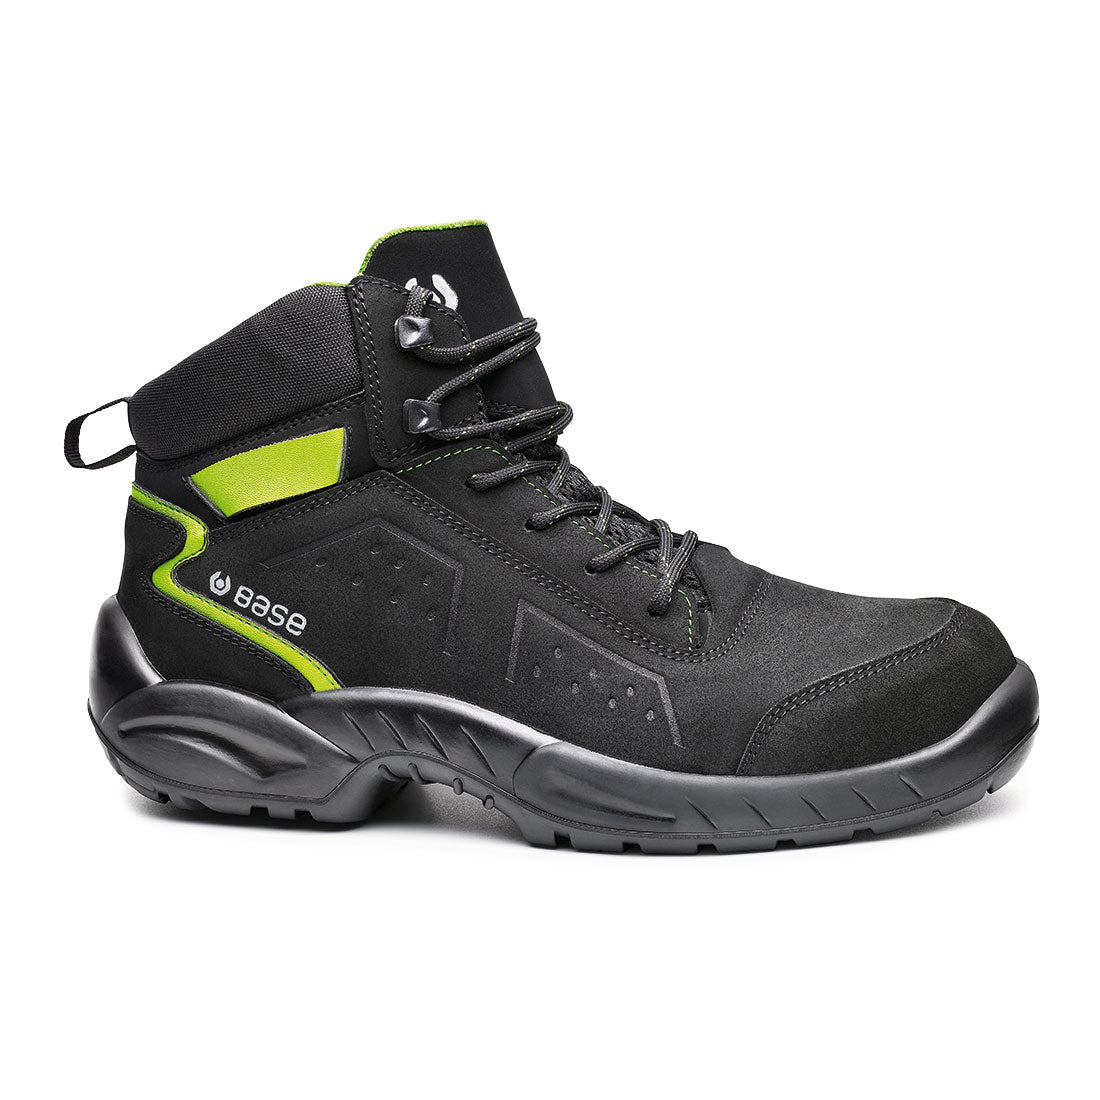 BASE B0177 Safety Boot Shoe Black/Green Chester Top